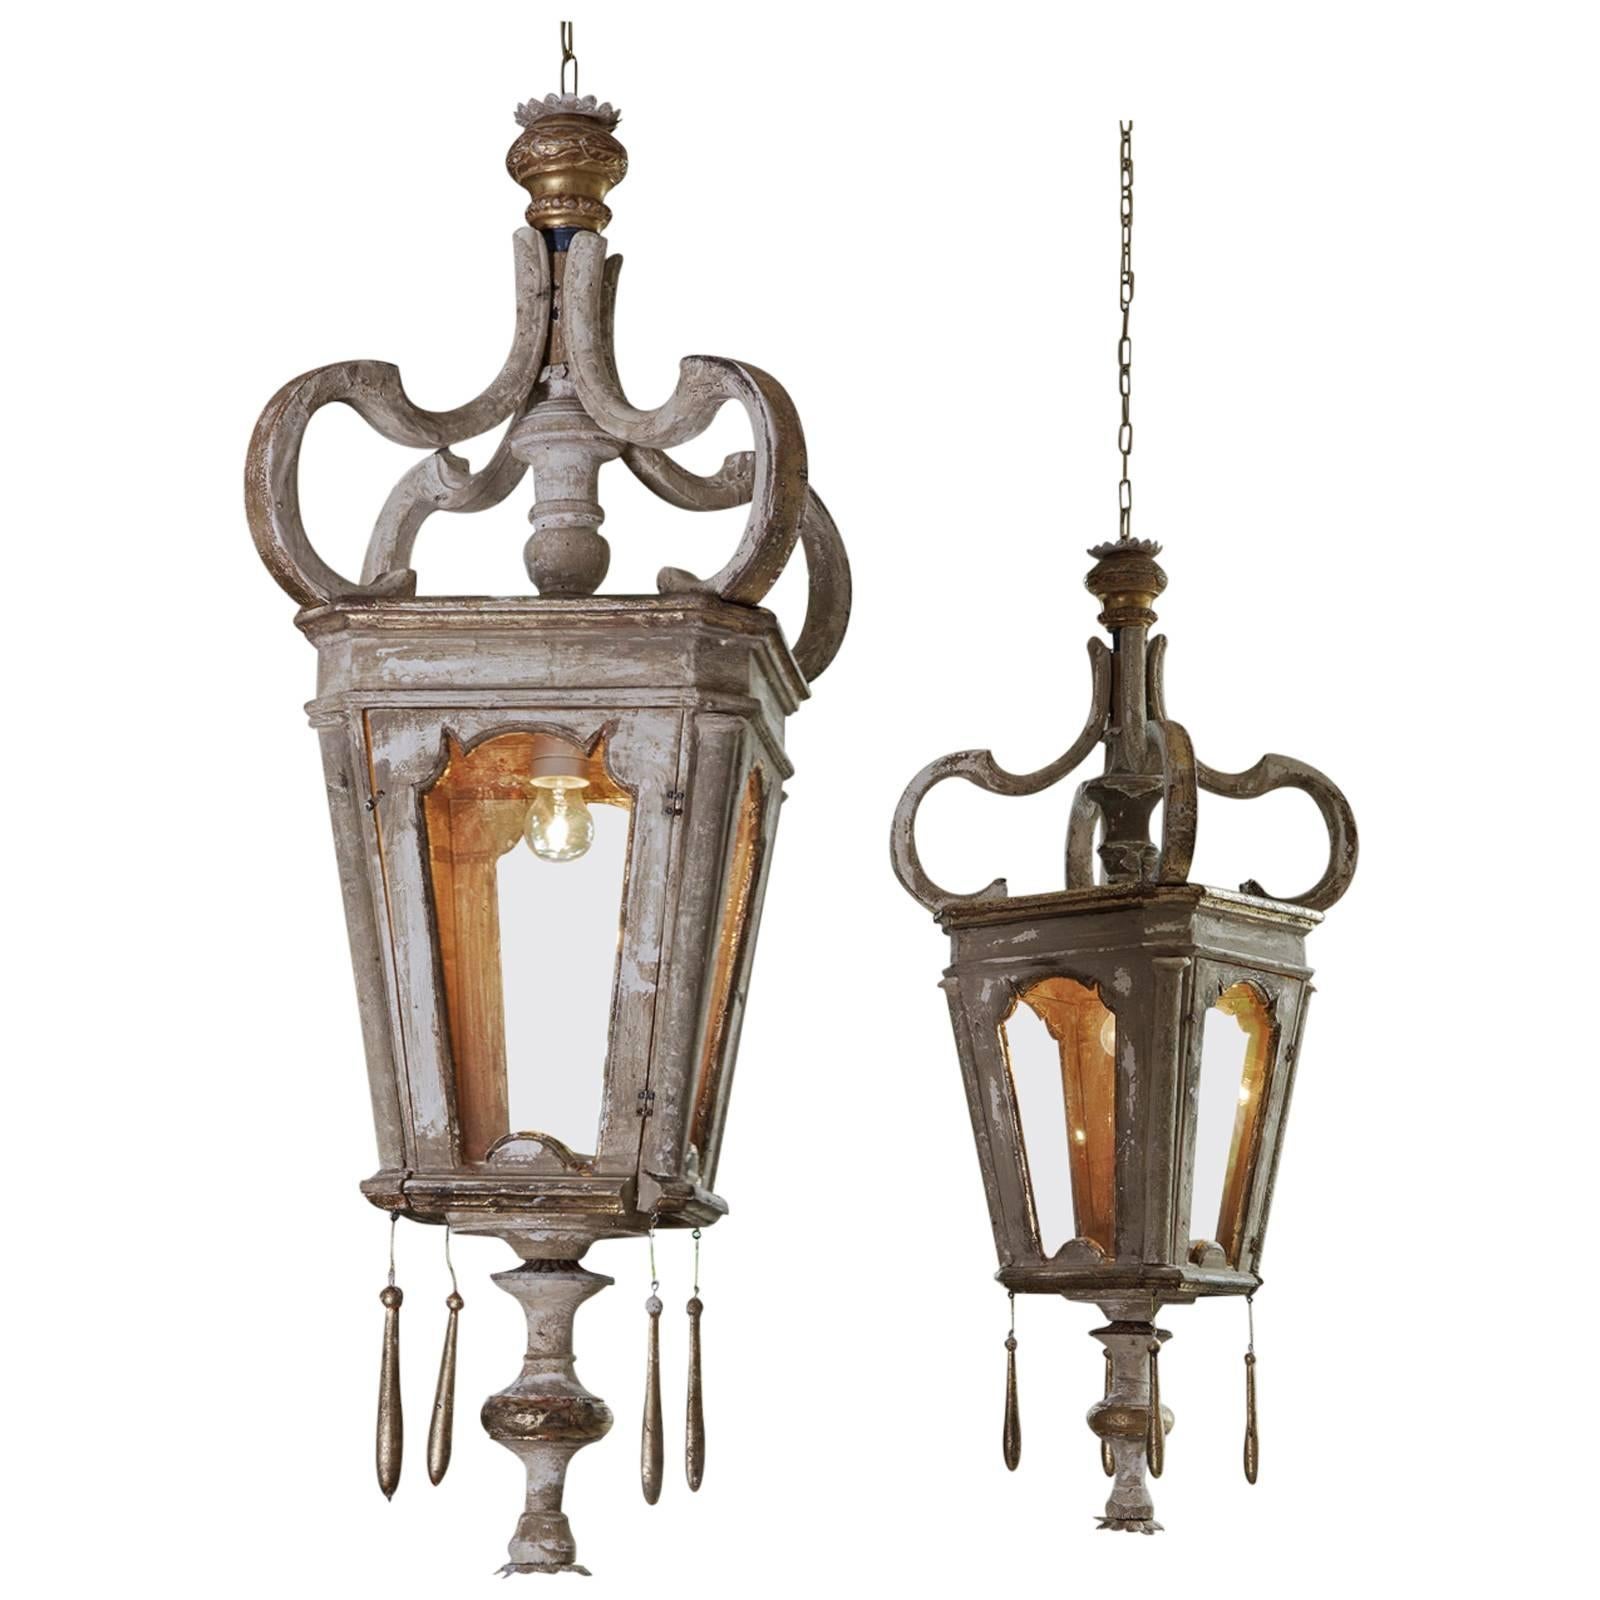 Large Decorative Wooden Lanterns Compiled from Antique Elements